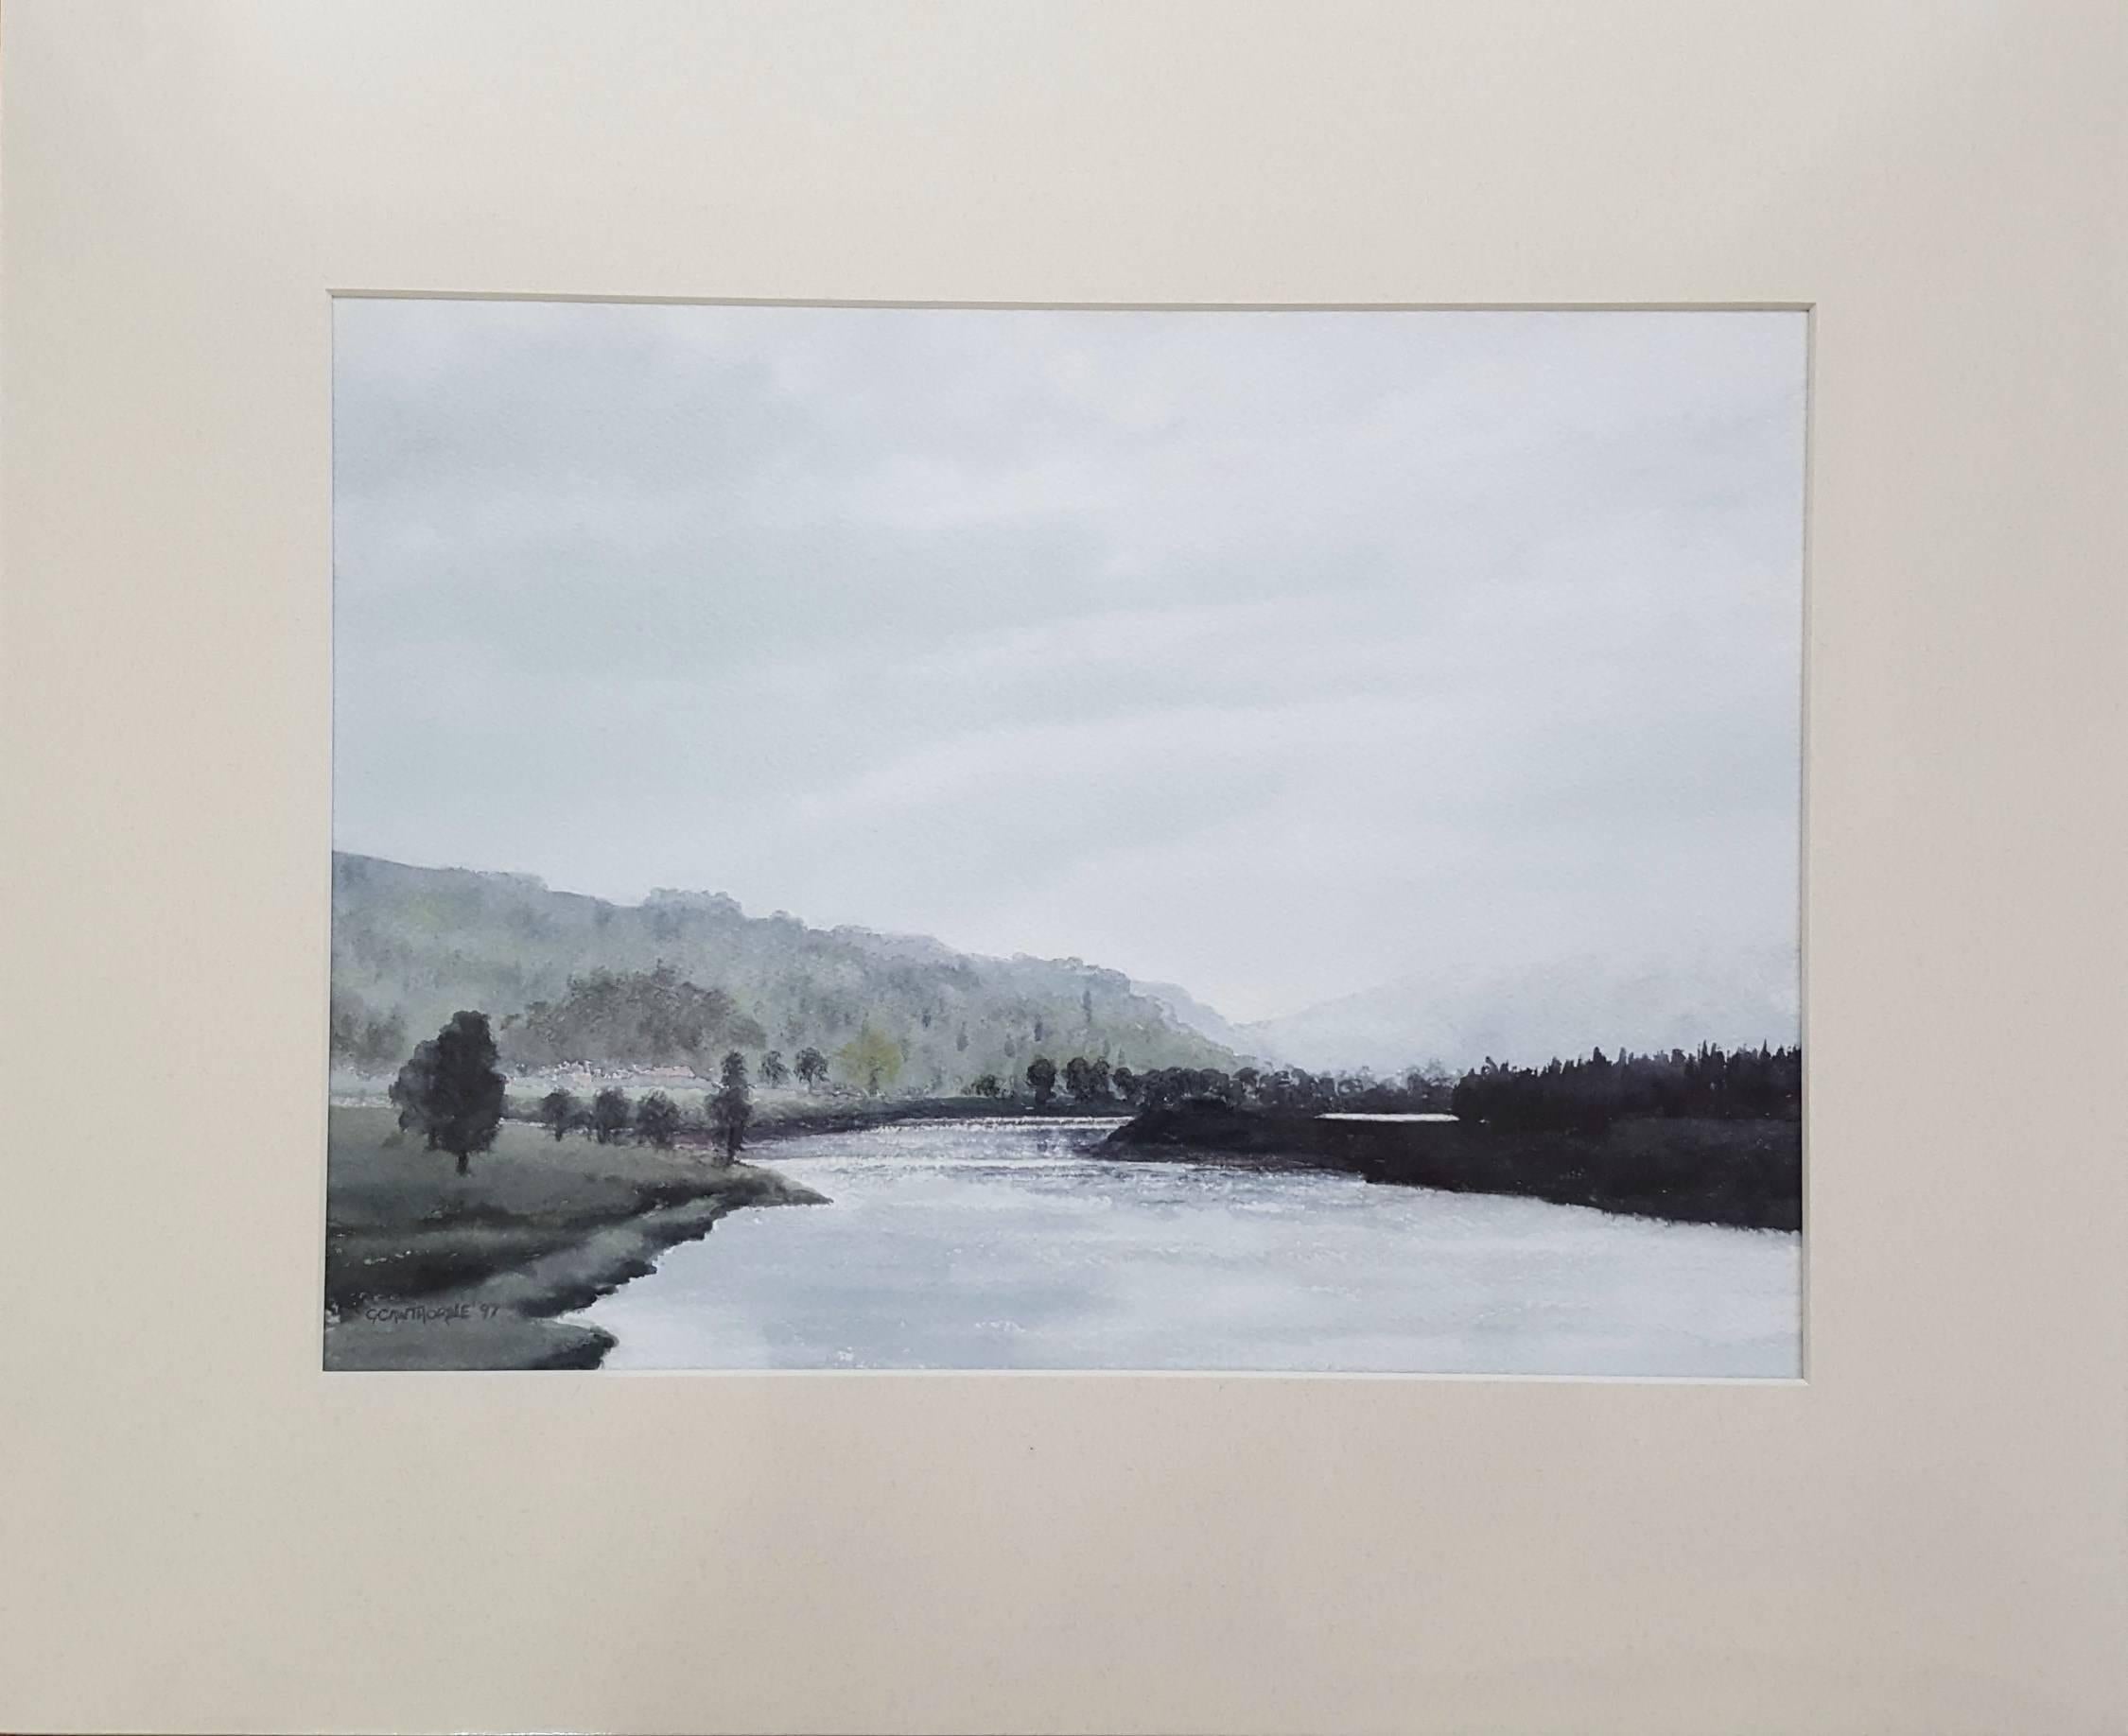 River Tay, Scotland - Art by Gillie Cawthorne